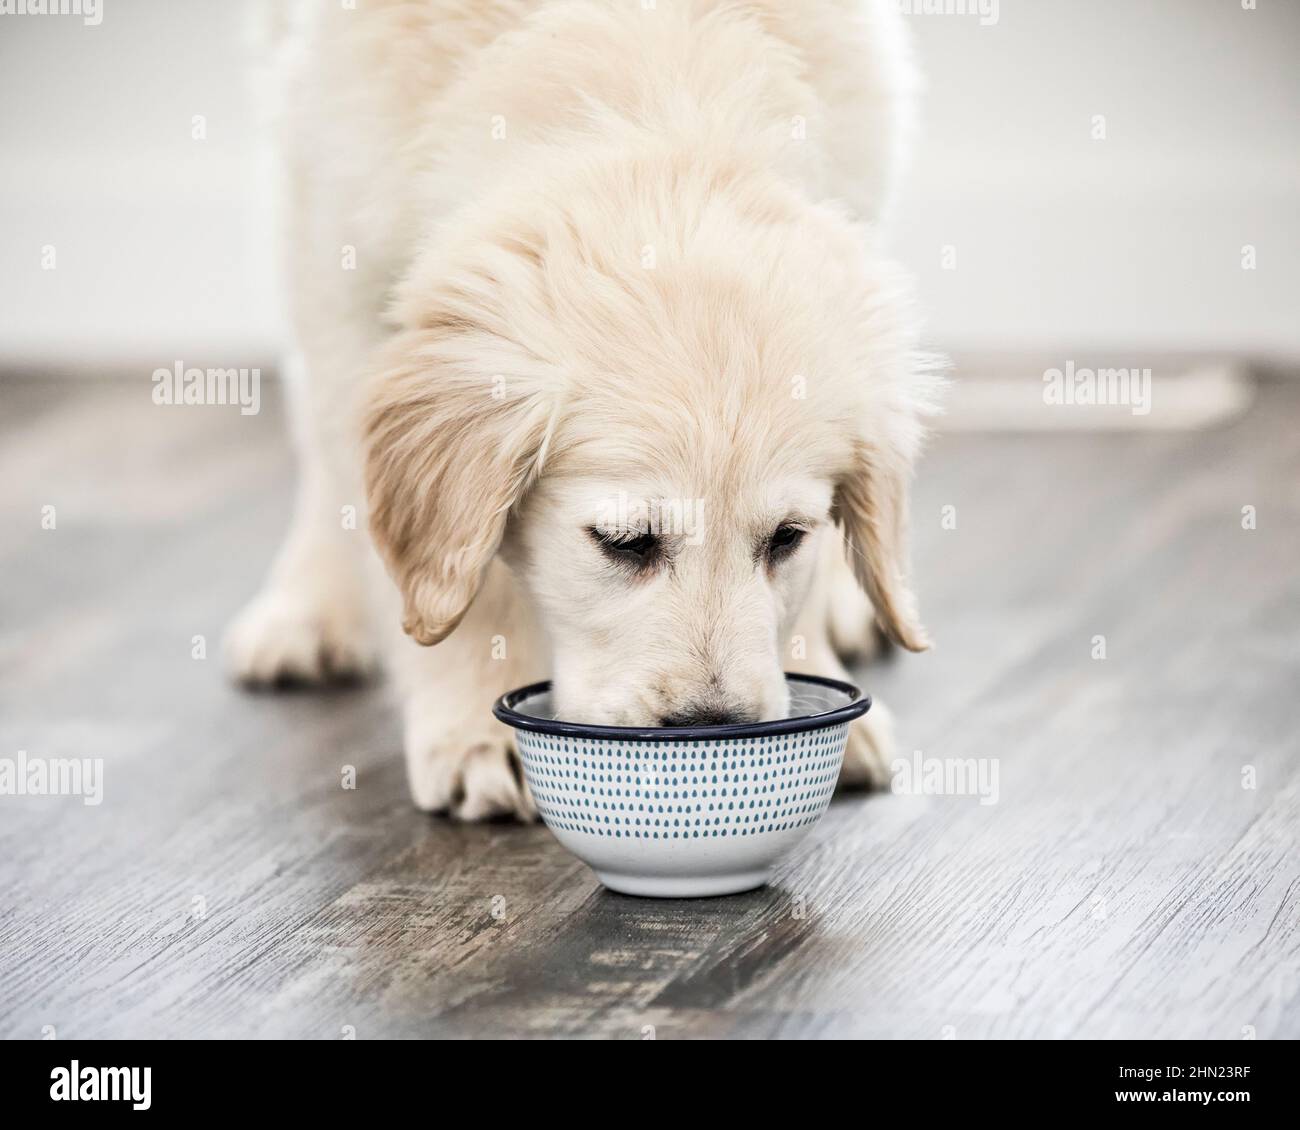 An English Cream Golden Retriever puppy eating from his food bowl. Stock Photo